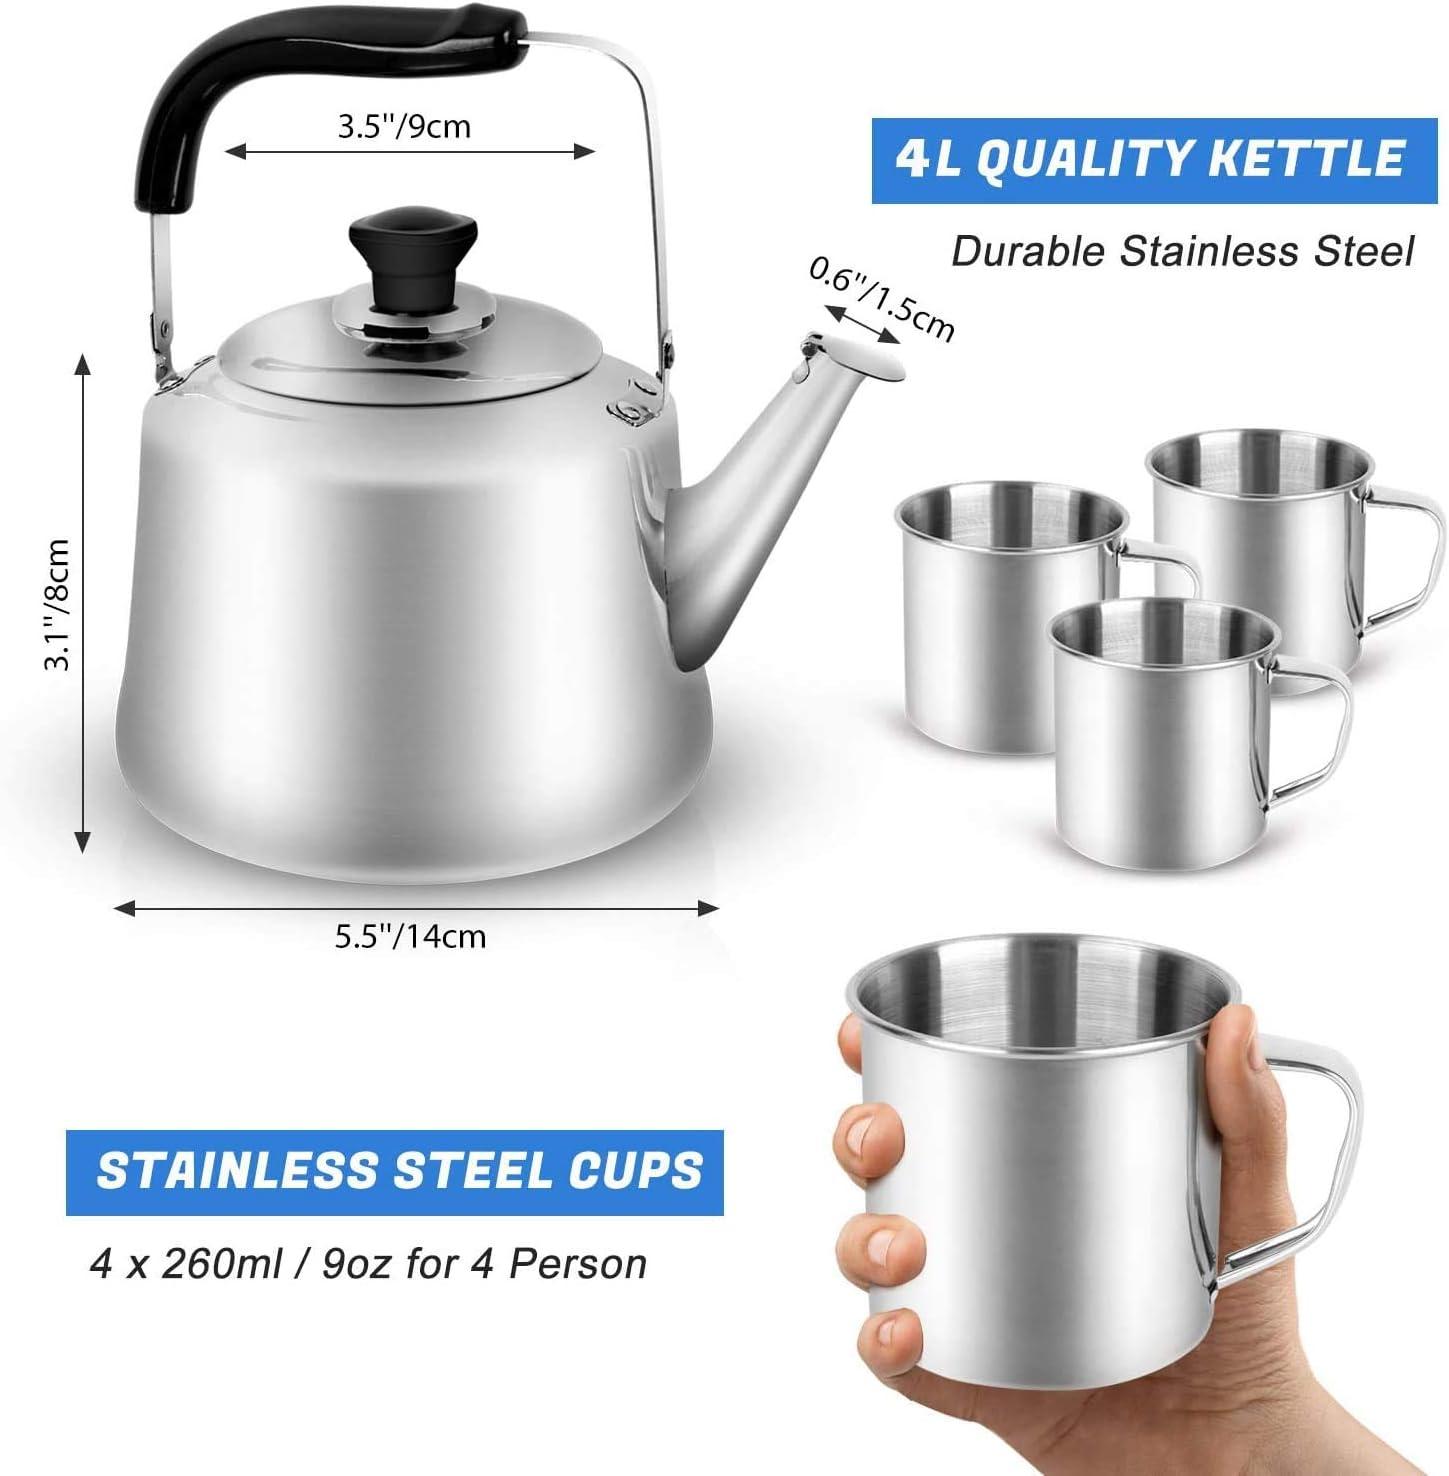 Sturdy Stainless Steel Cup